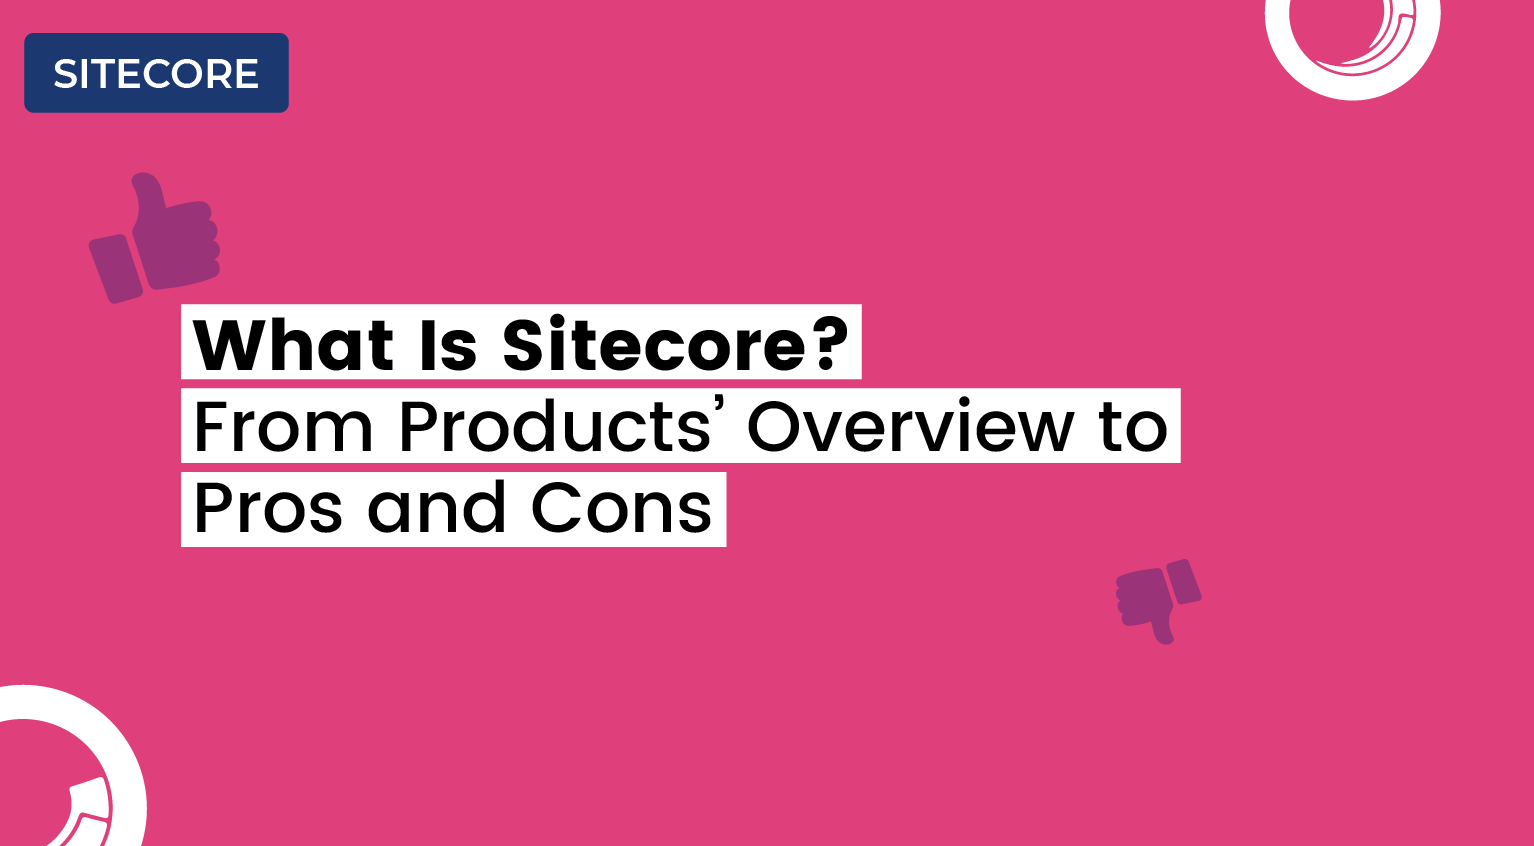 What Is Sitecore